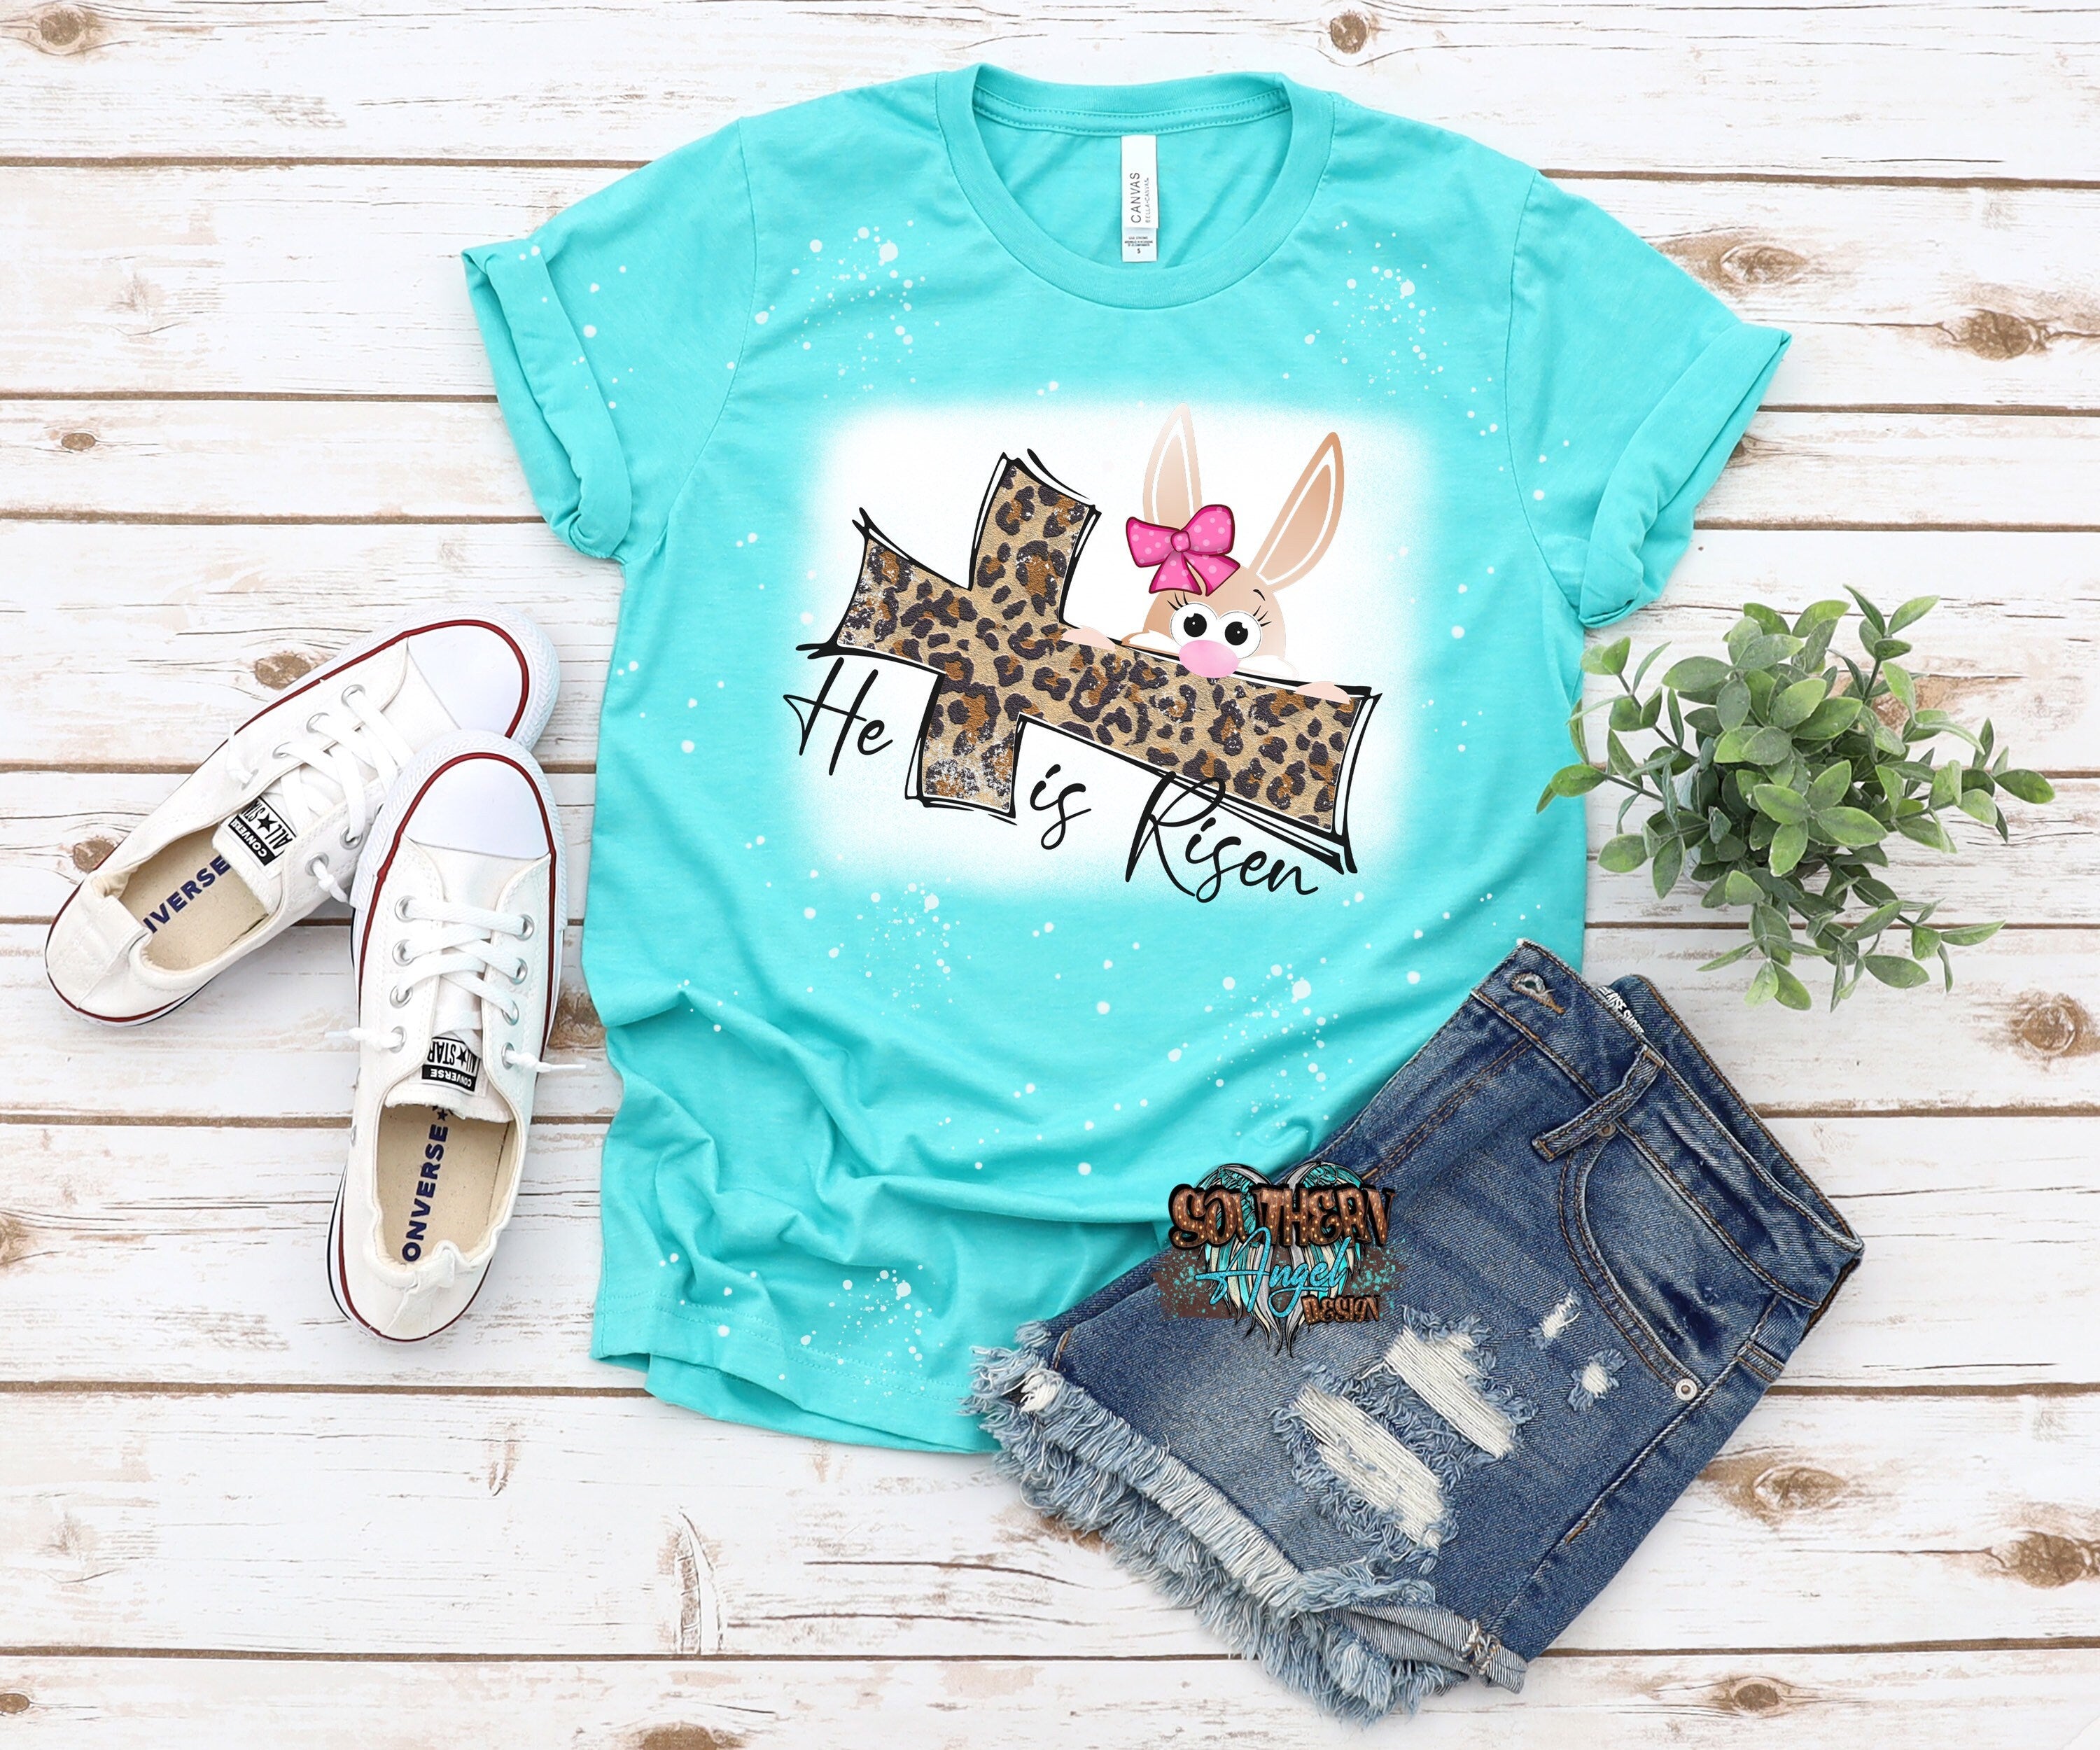 Bleached He Is Resin shirt, Women’s Easter shirt, Easter TShirt, Ladies bleached TShirt, Easter Sunday, Bunny shirt, Happy Easter